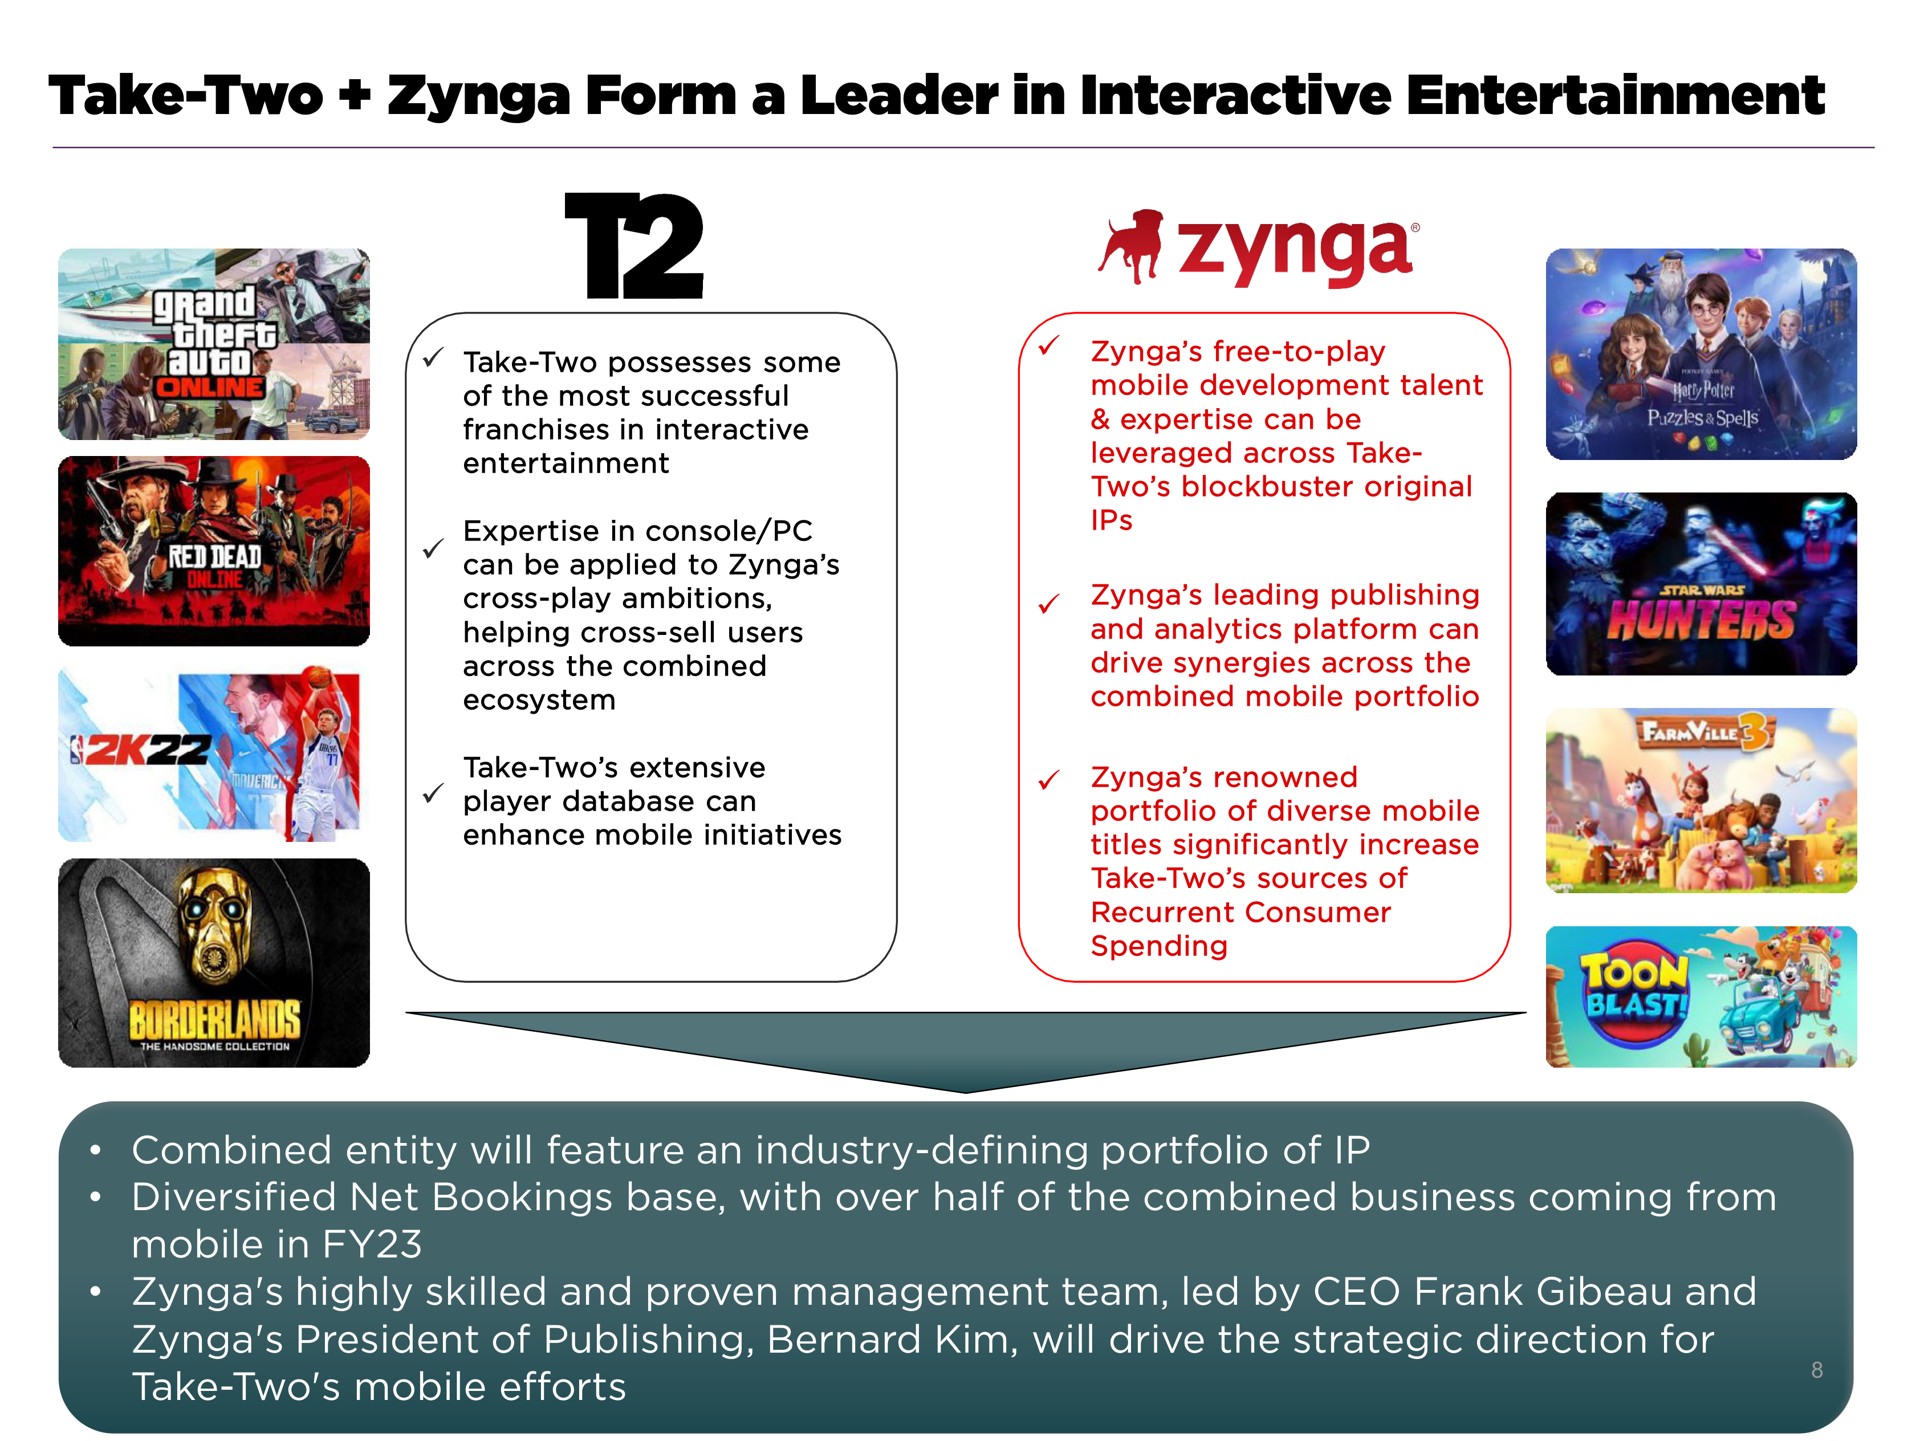 take two form a leader in interactive entertainment | Take-Two Interactive